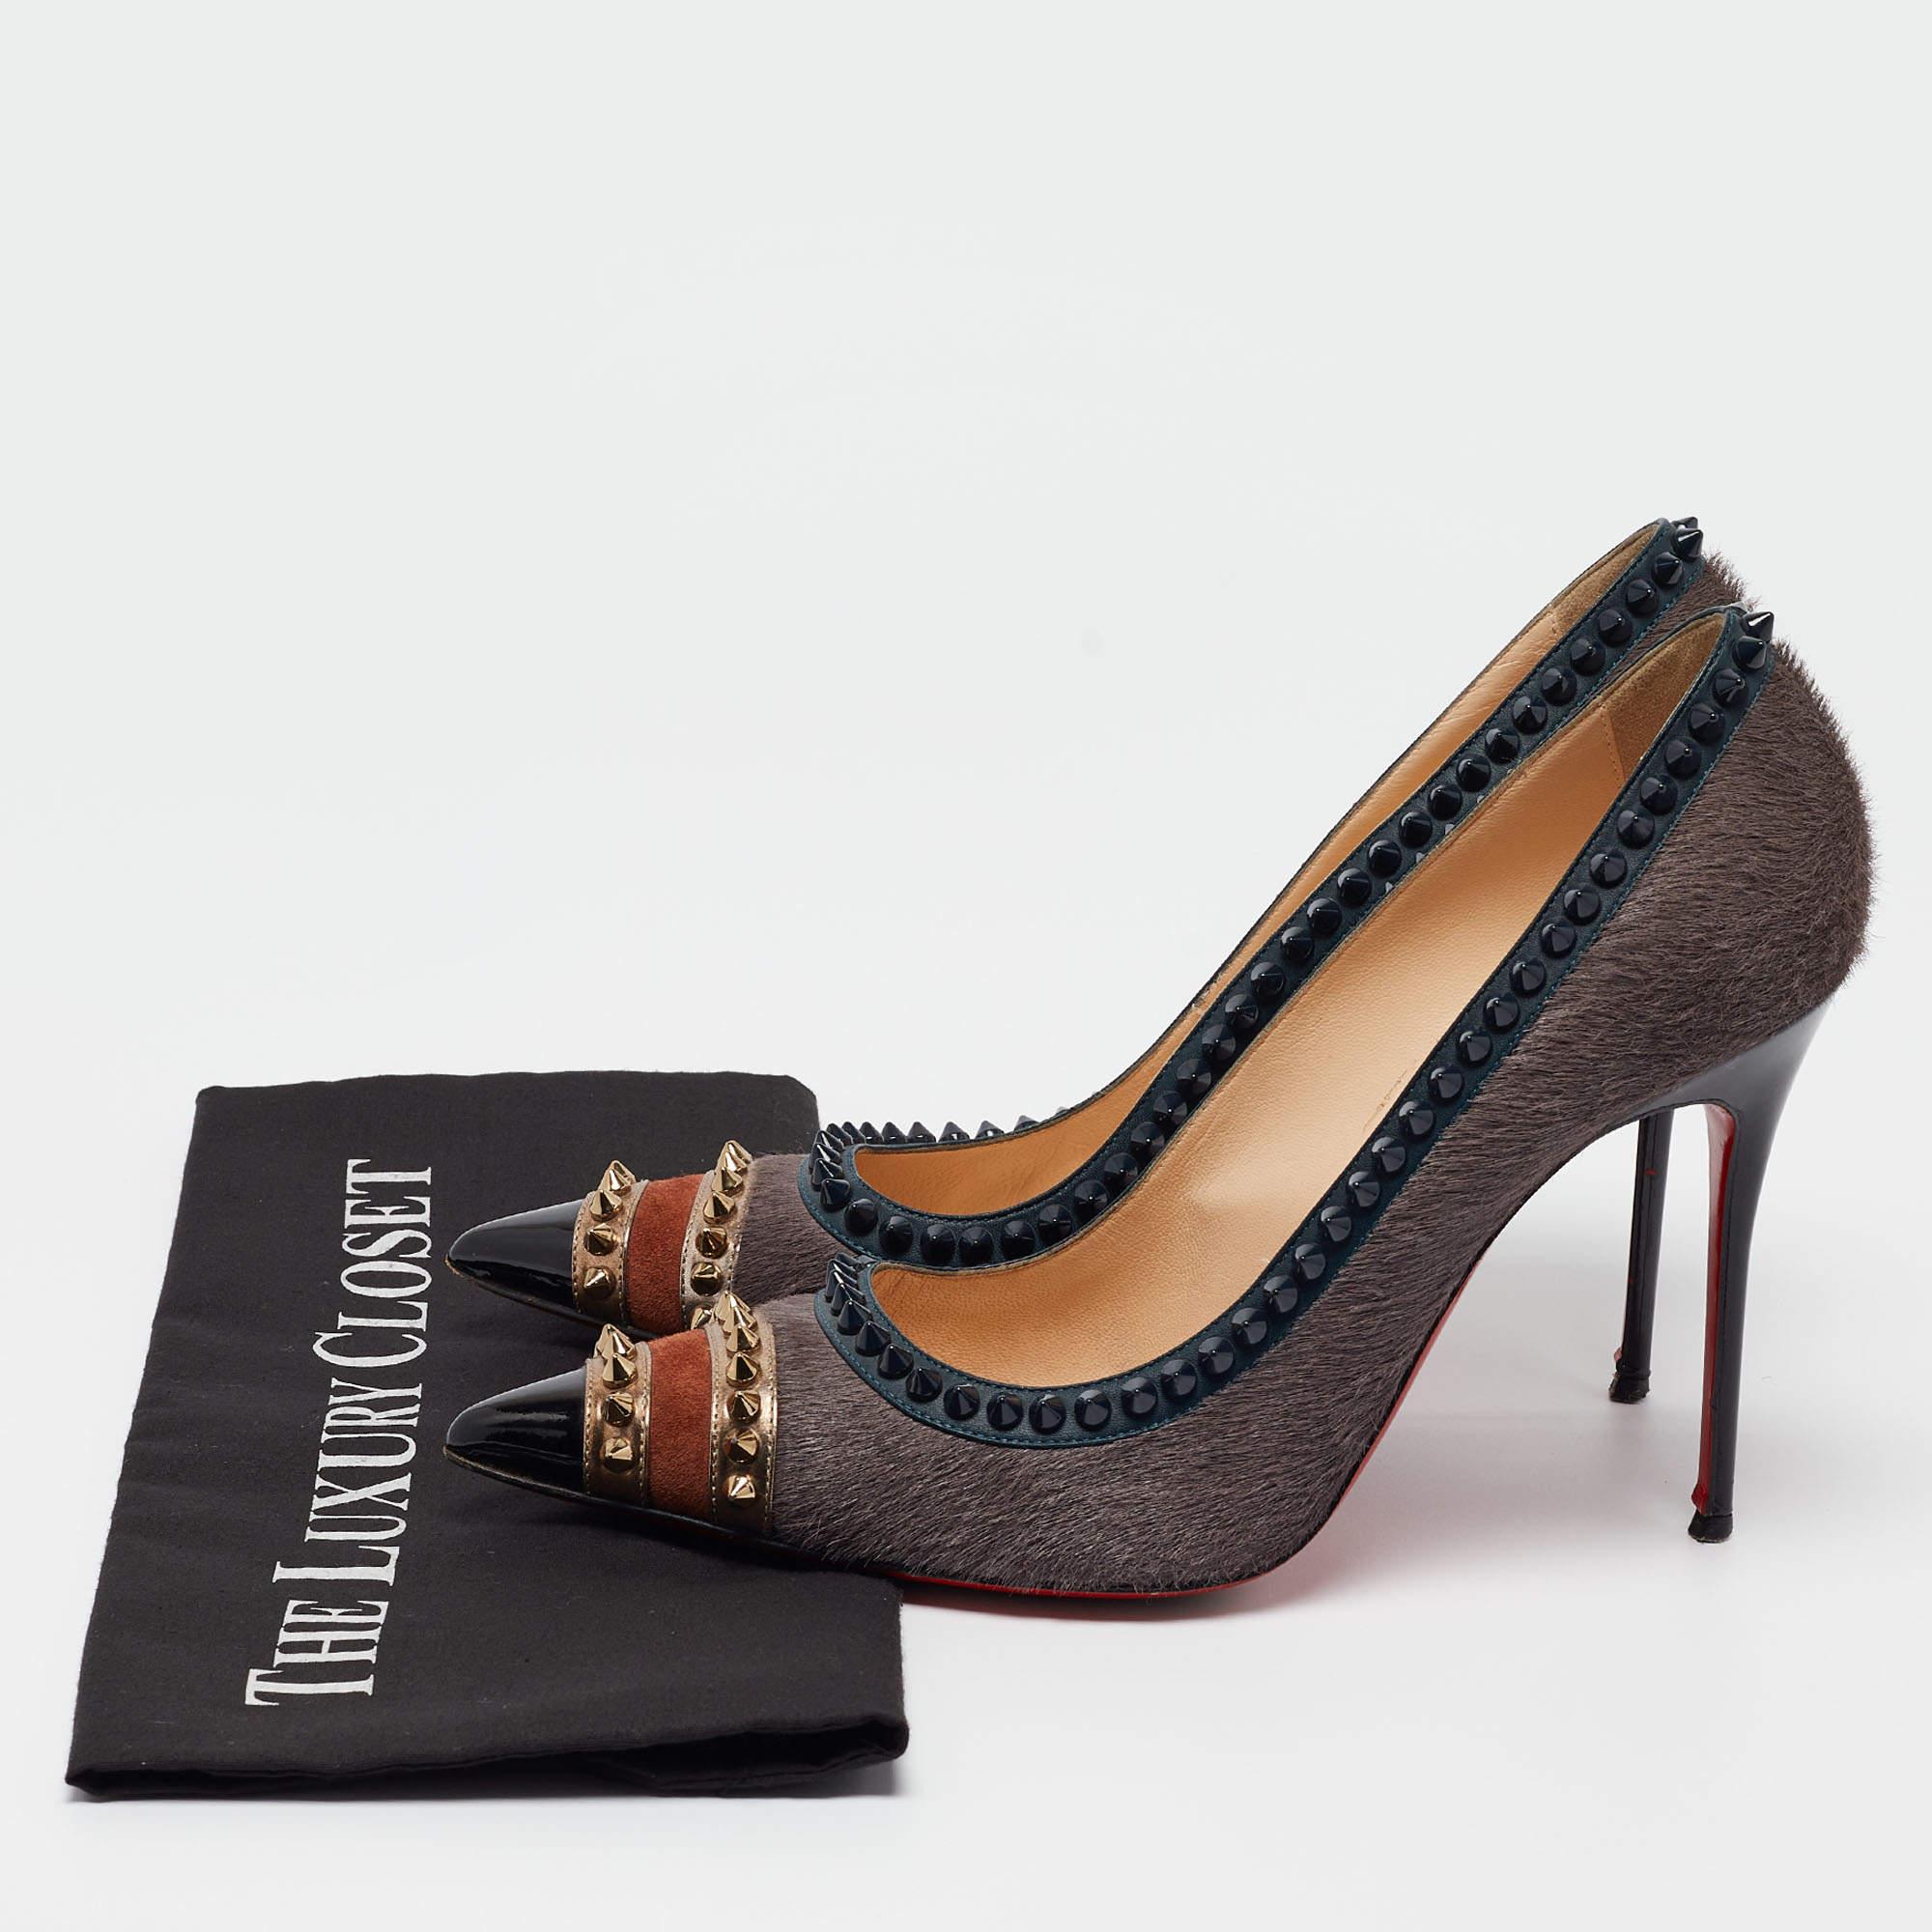 Christian Louboutin Multicolor Calf Hair and Leather Malabar Hill Spiked Pointed For Sale 5